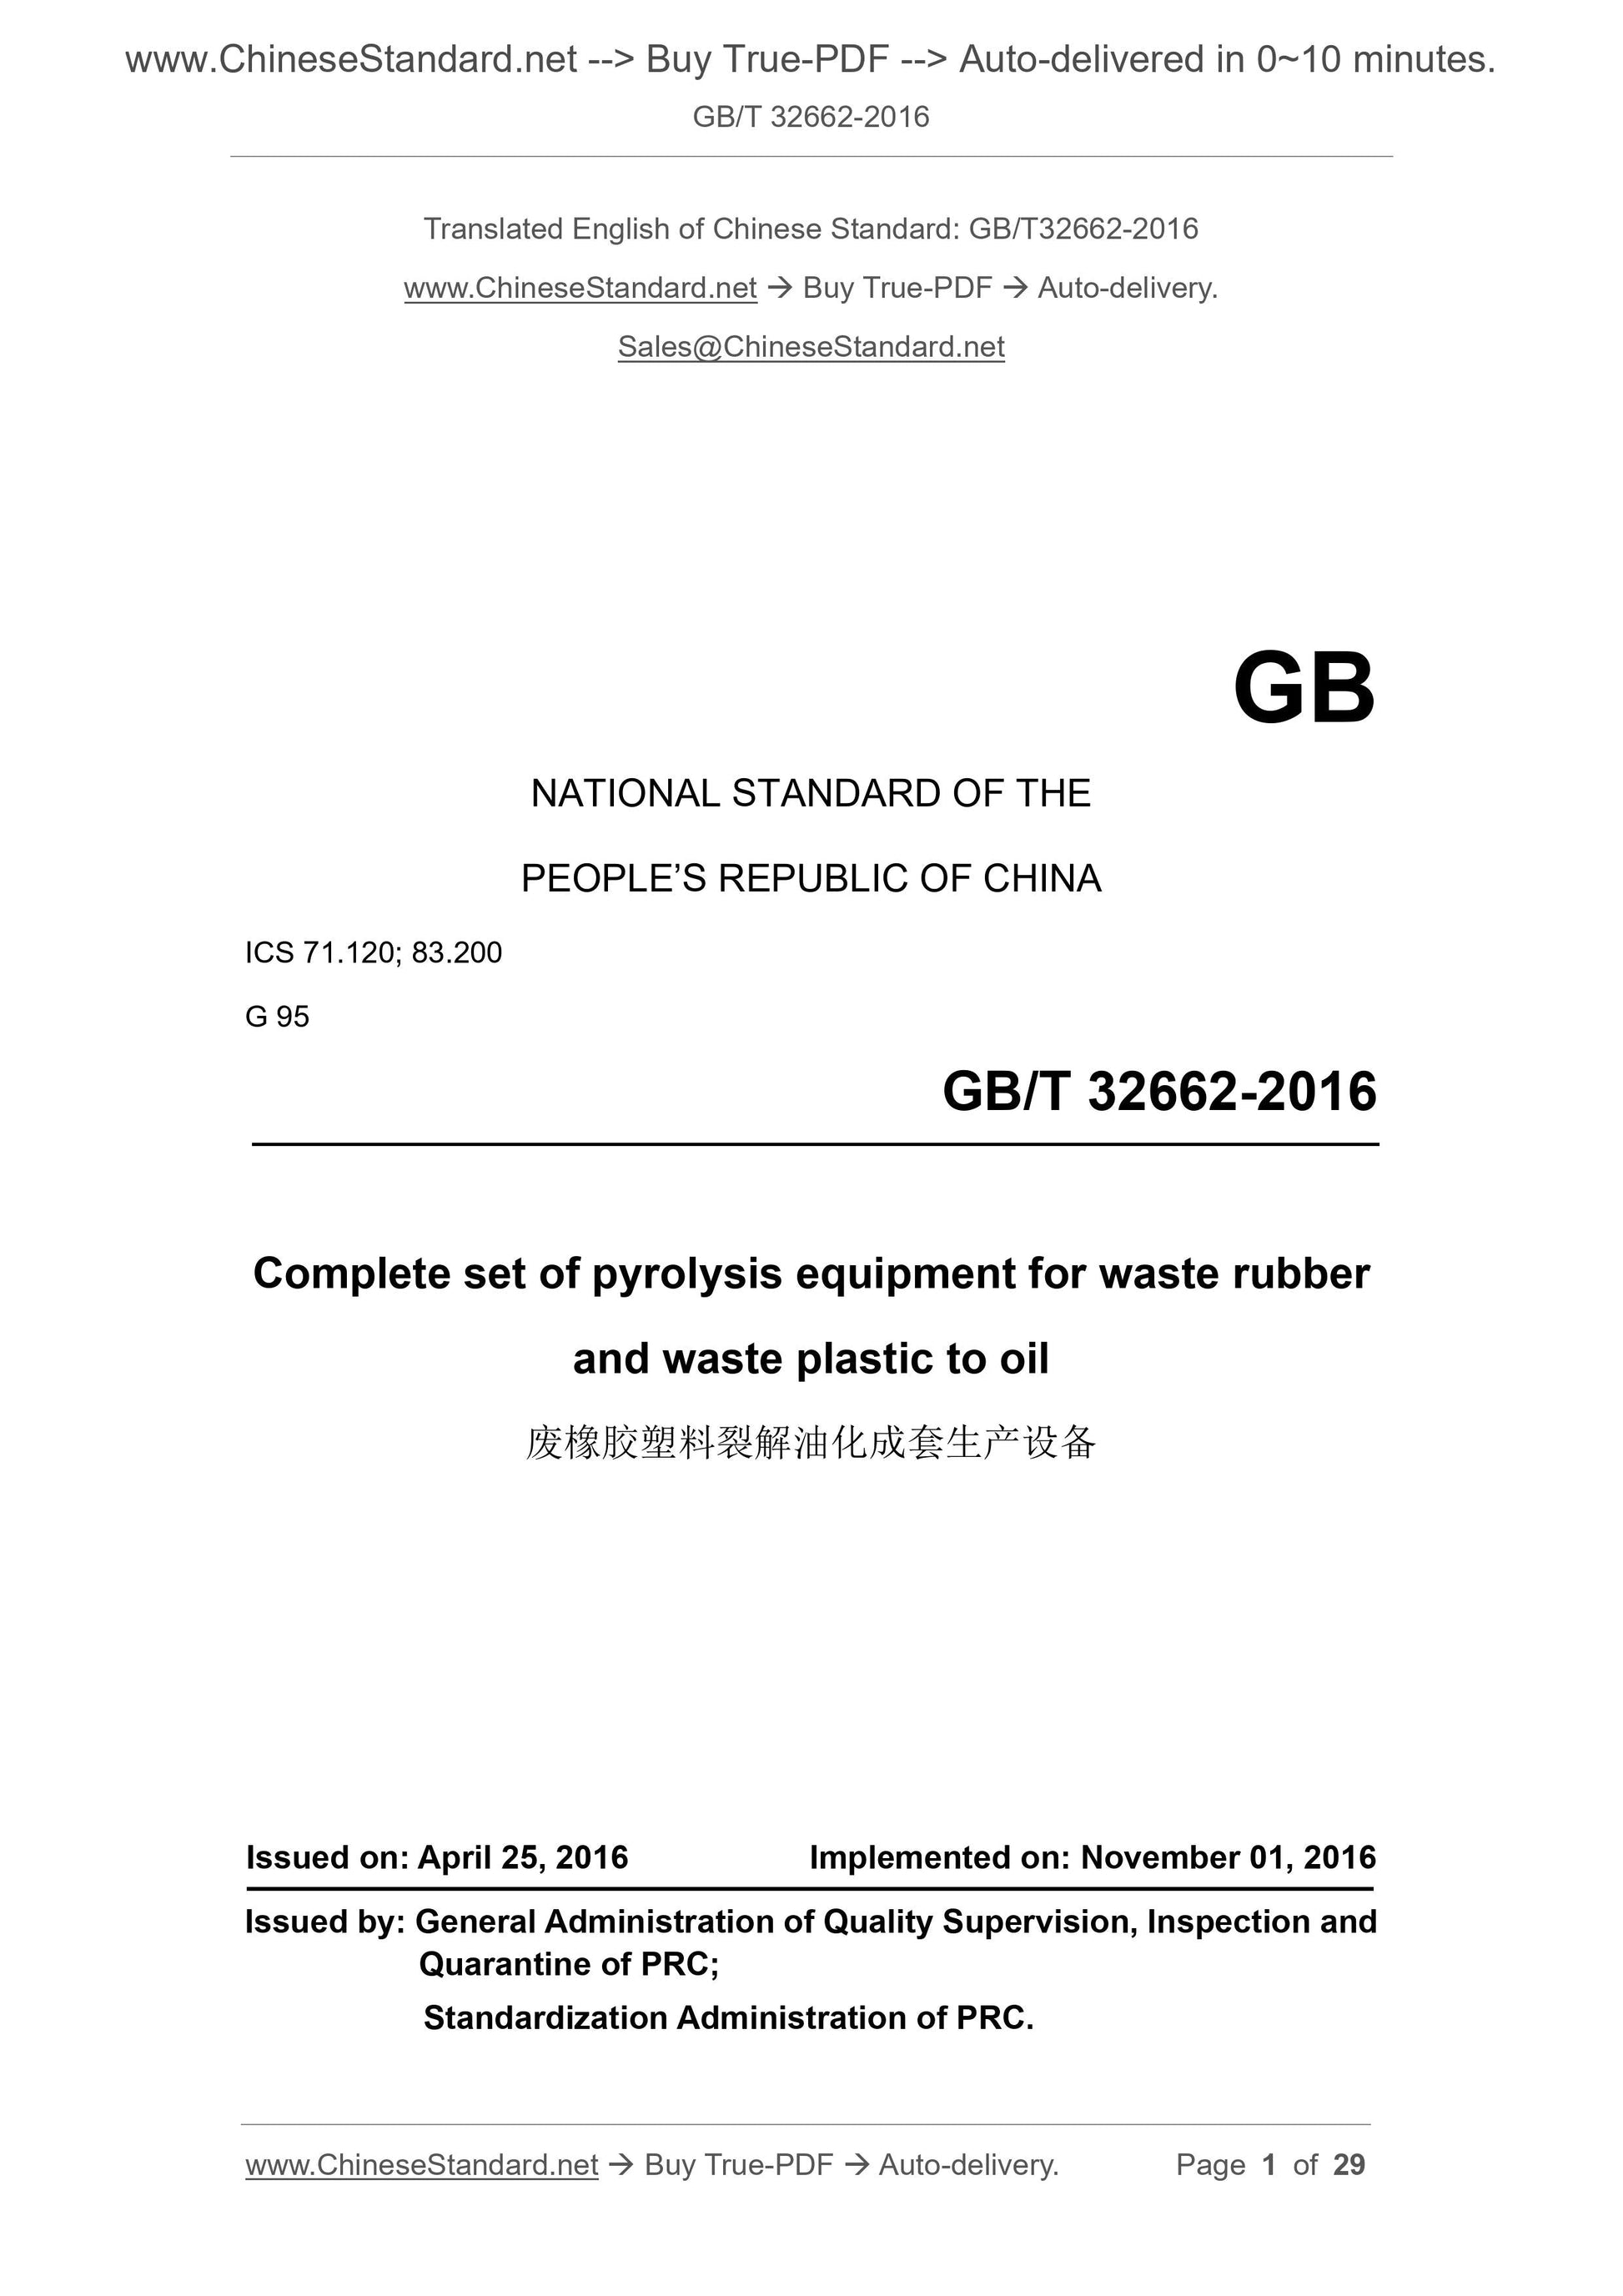 GB/T 32662-2016 Page 1